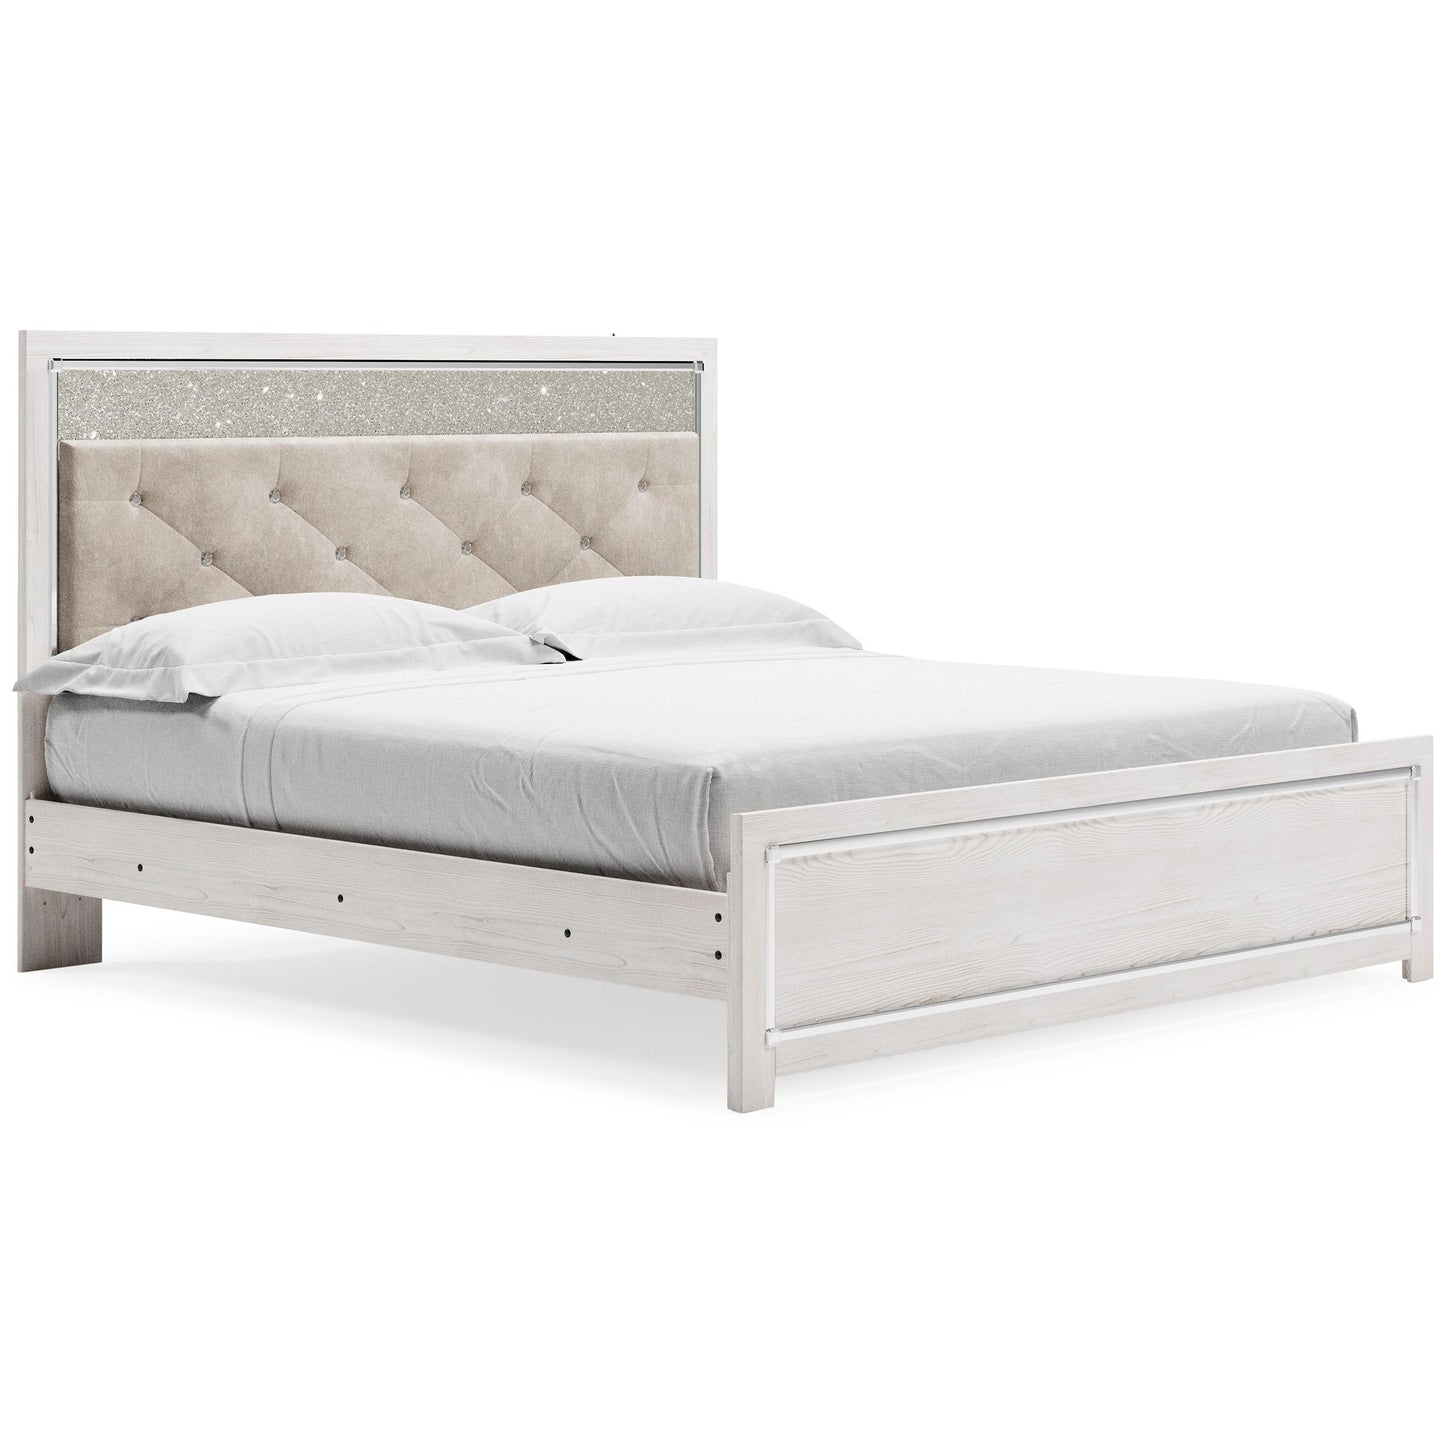 Signature Design by Ashley Altyra King Upholstered Panel Bed B2640-58/B2640-56/B2640-97